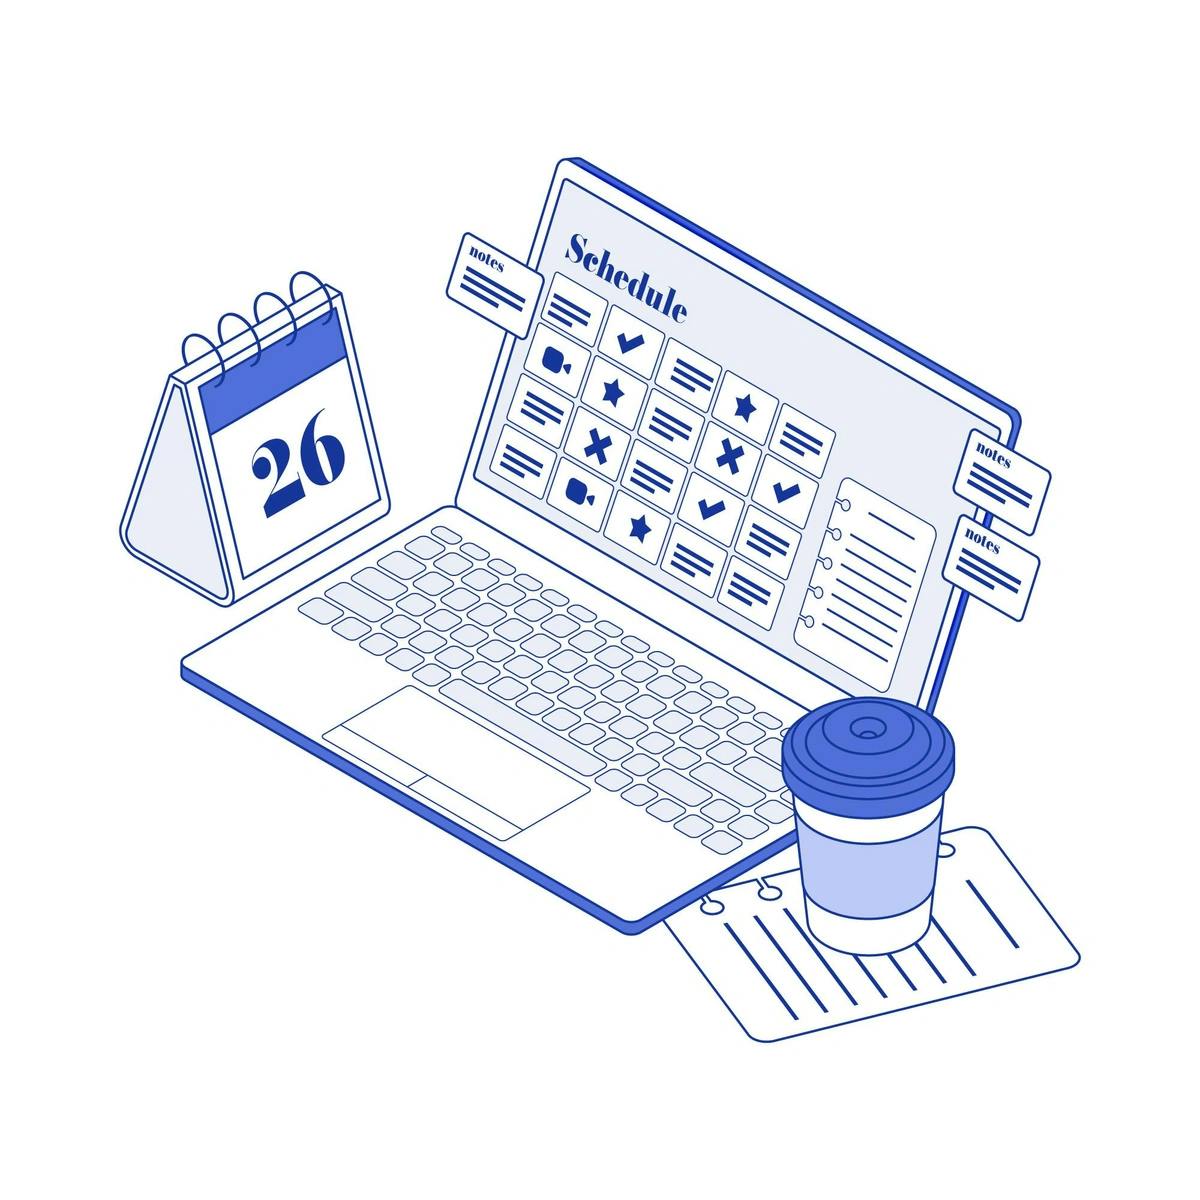 A stylized illustration of a laptop with a calendar on the screen, a coffee cup, and a notepad, suggesting themes of organization, work scheduling, or productivity.